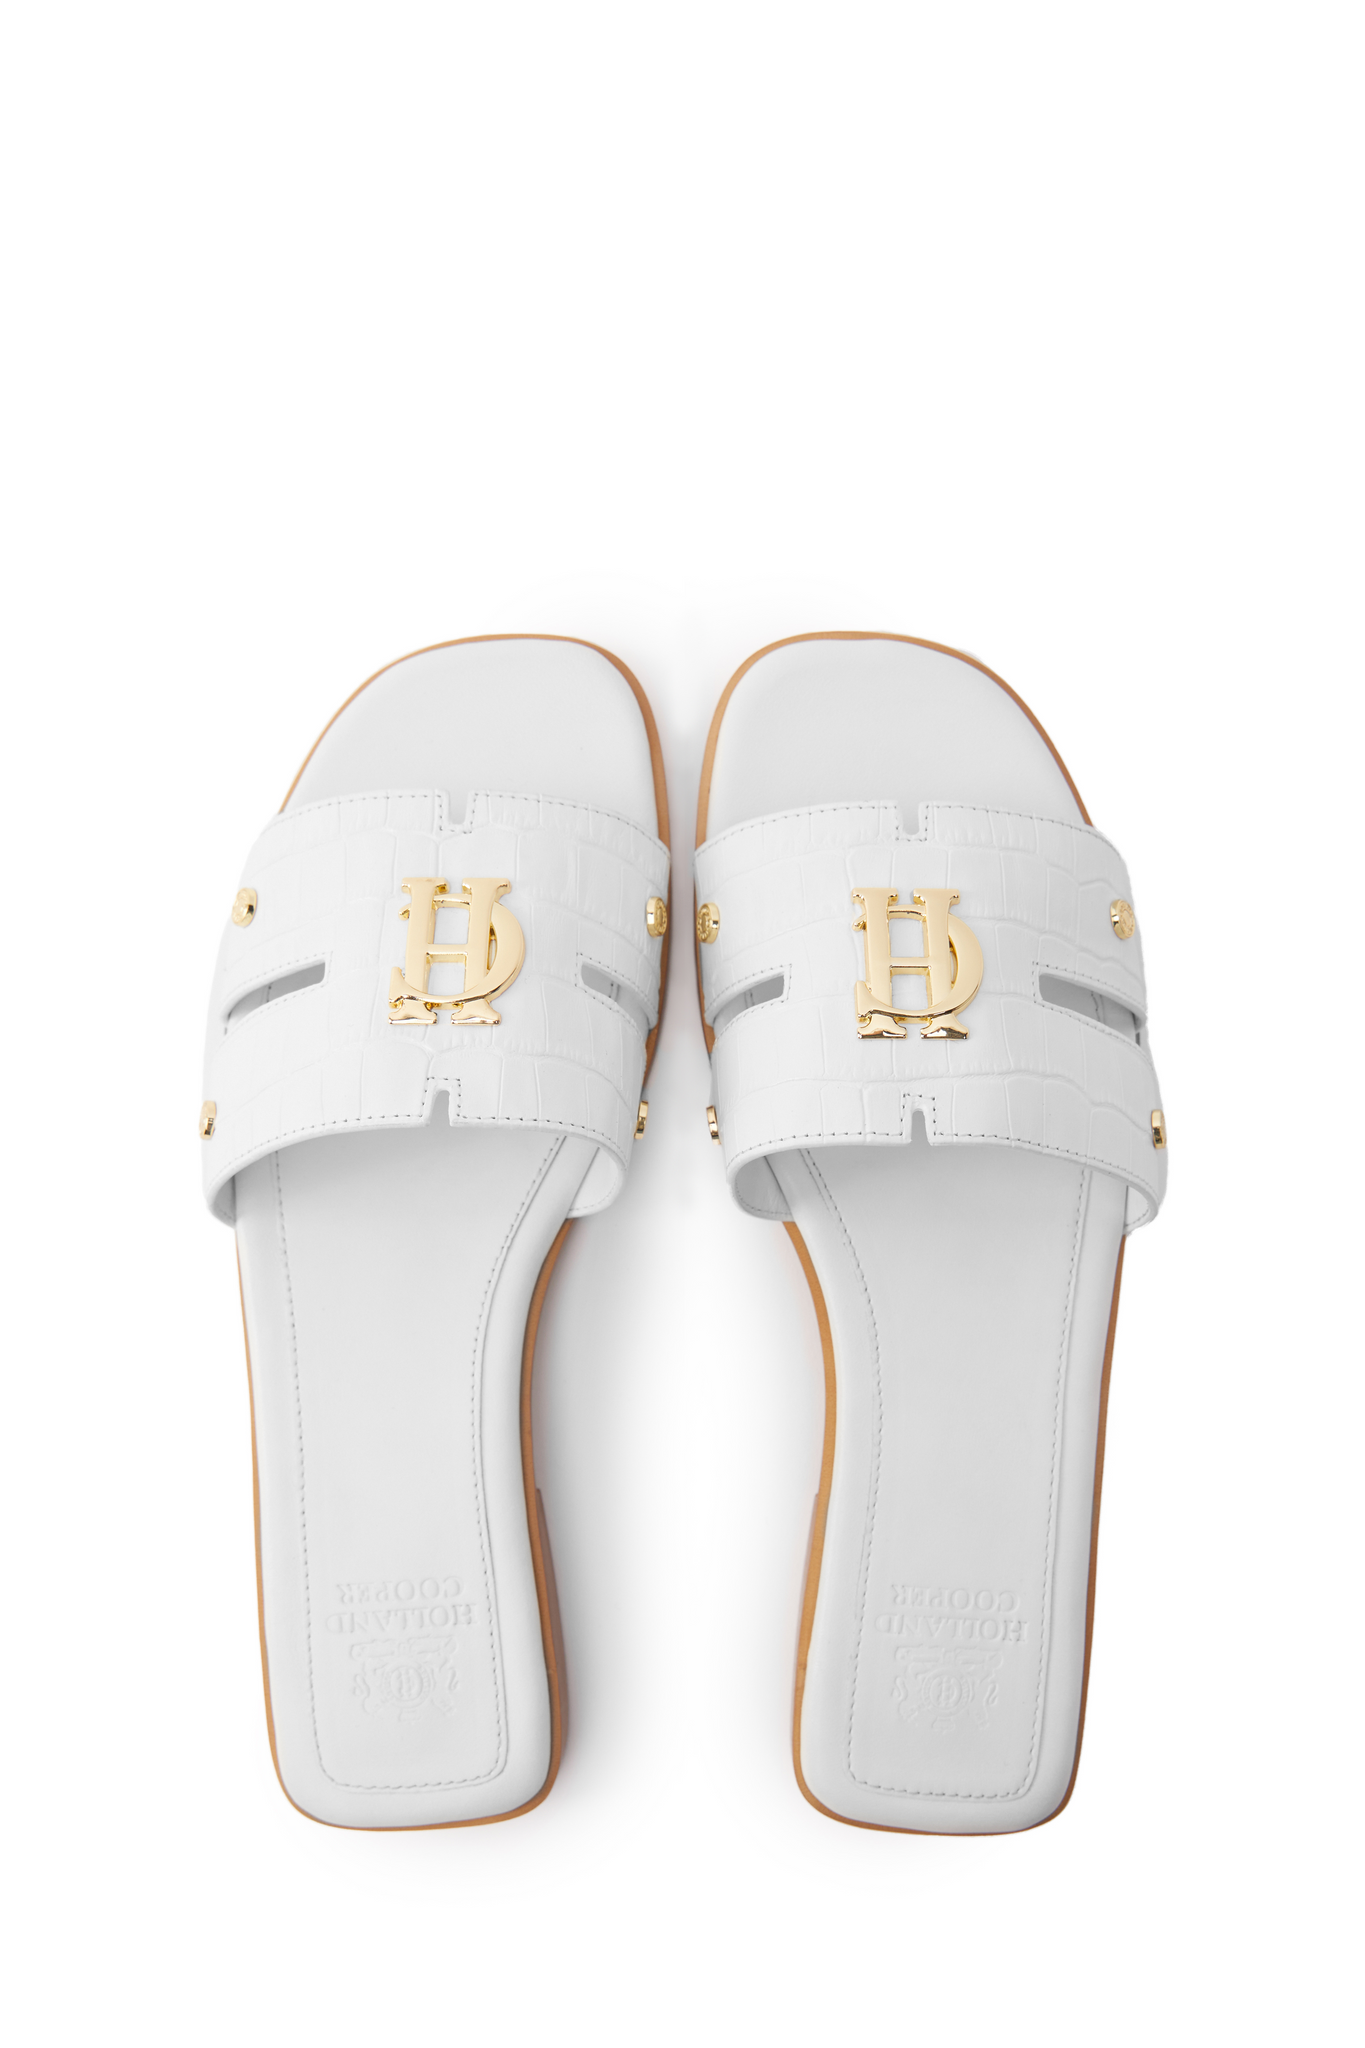 Birds eye view of white croc embossed leather sliders with a tan leather sole and gold hardware